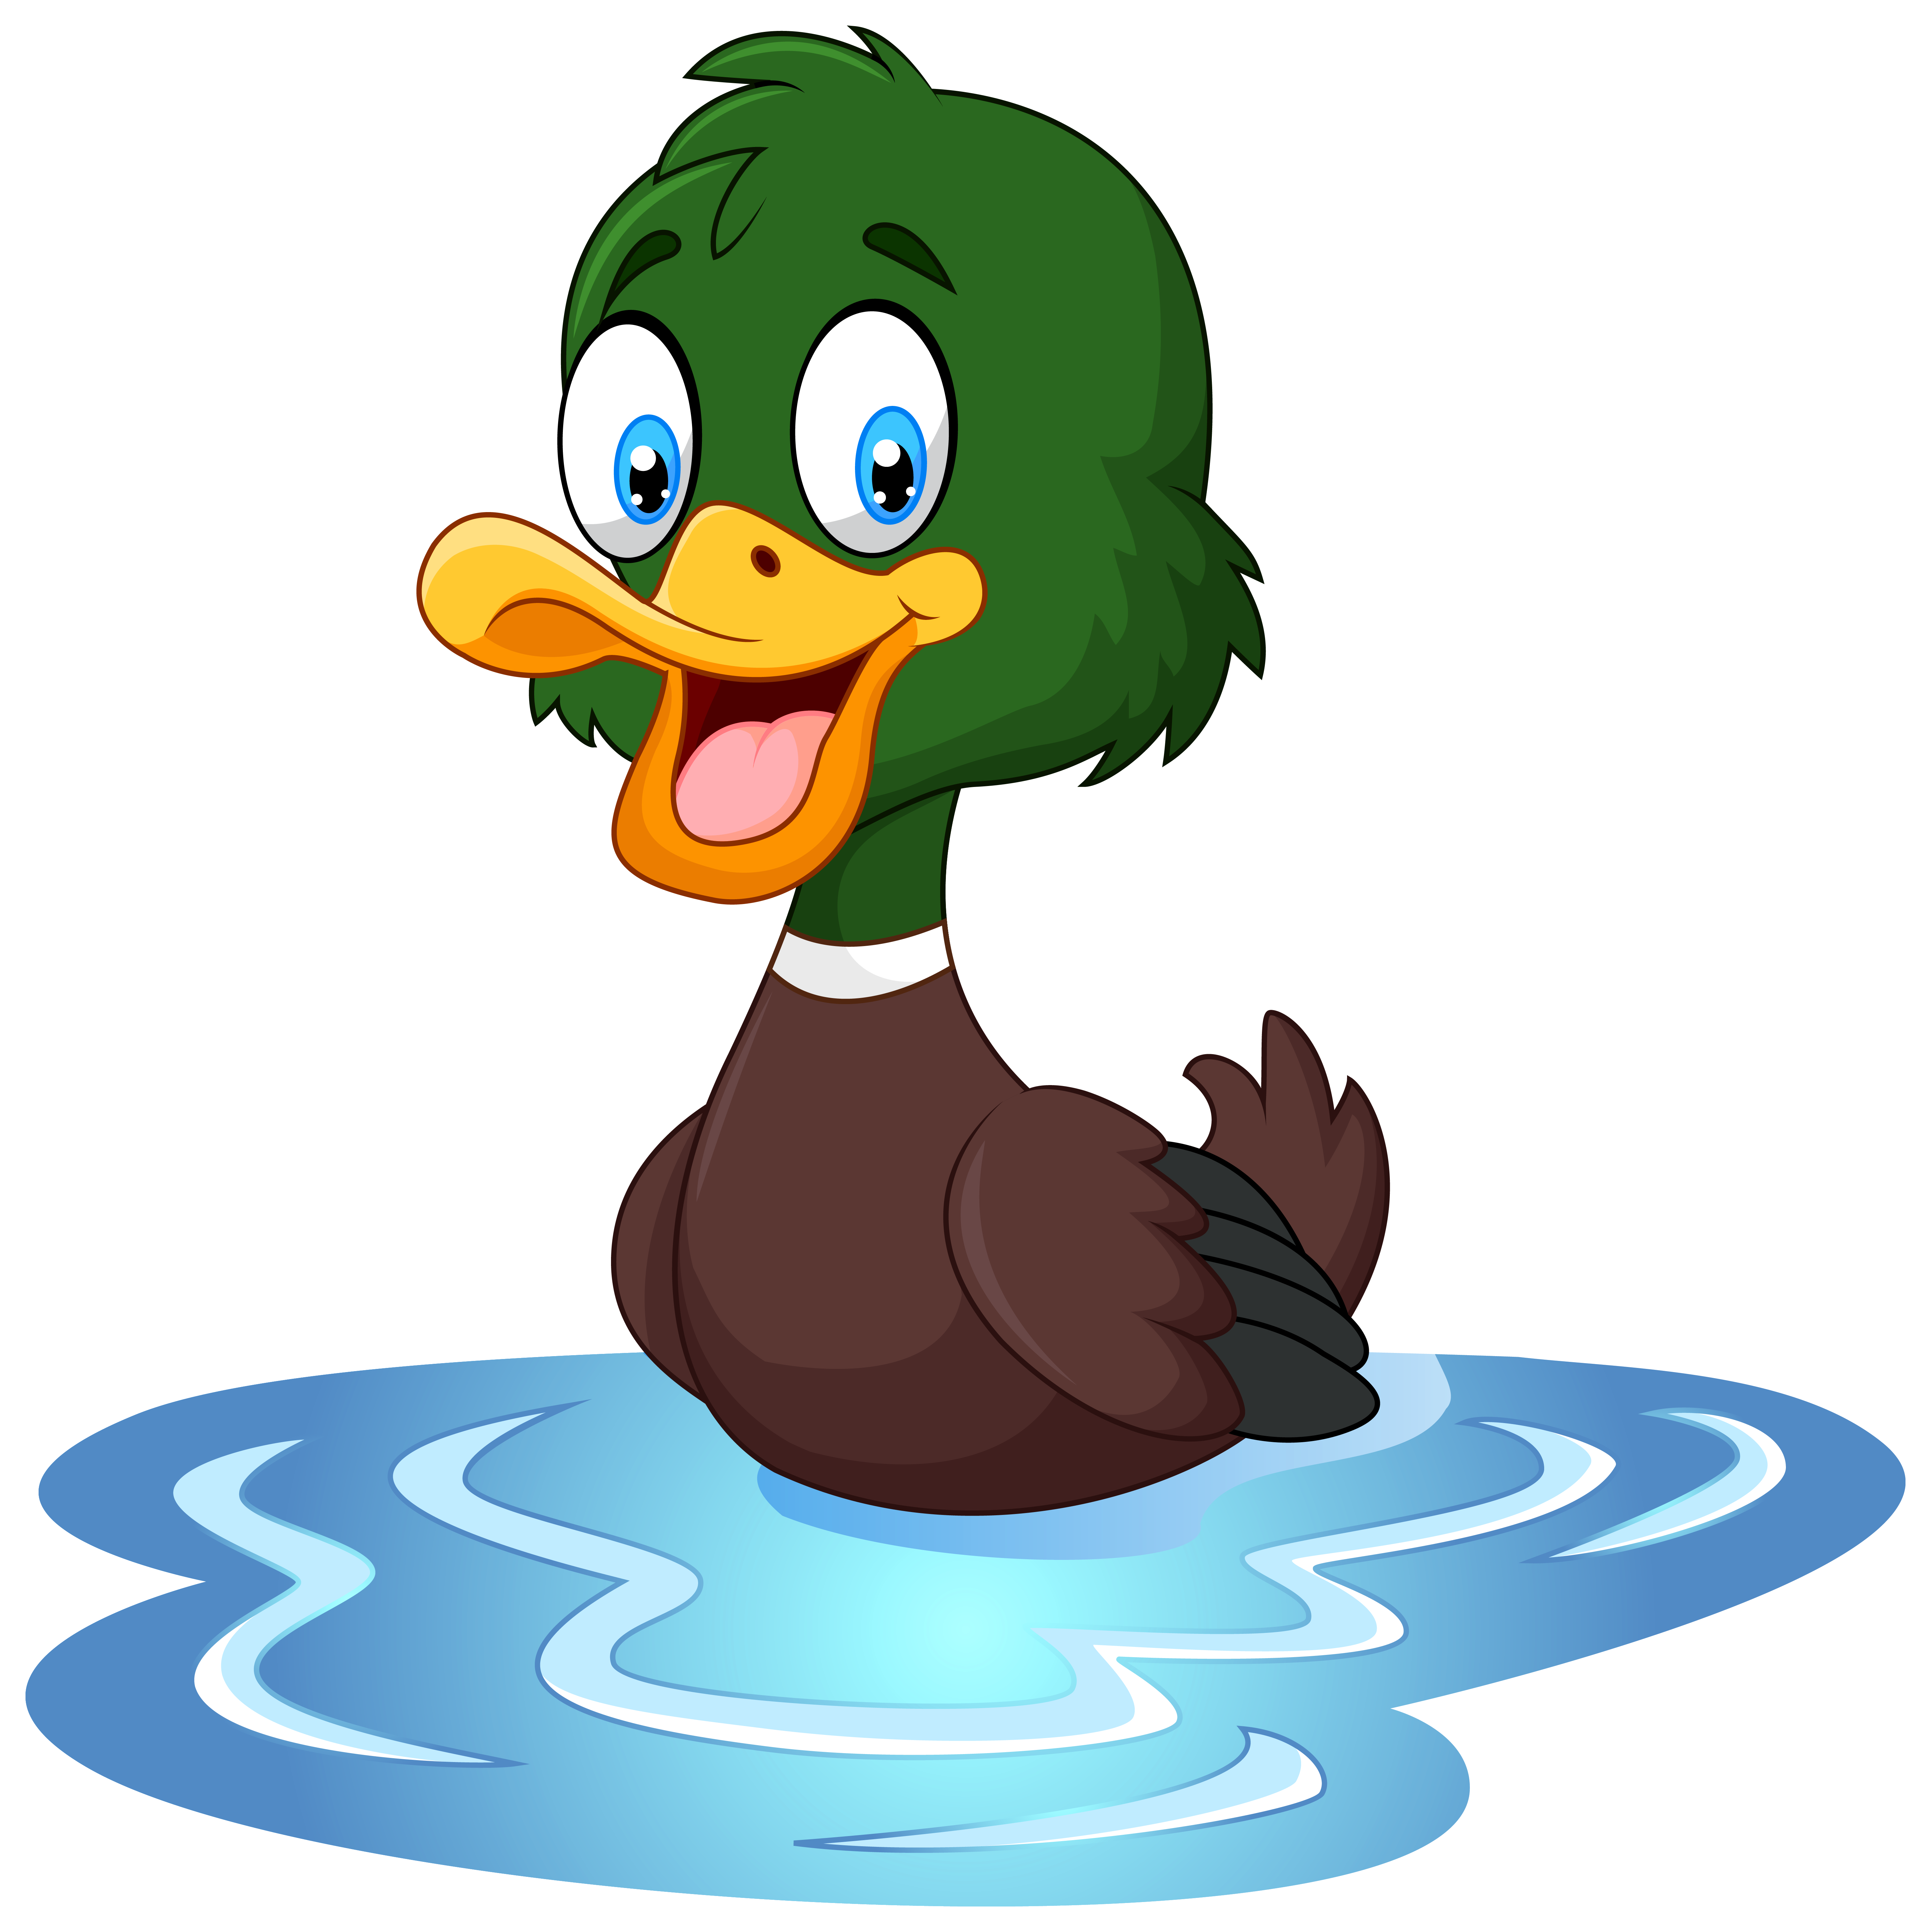 Duck Image Hd Image Clipart